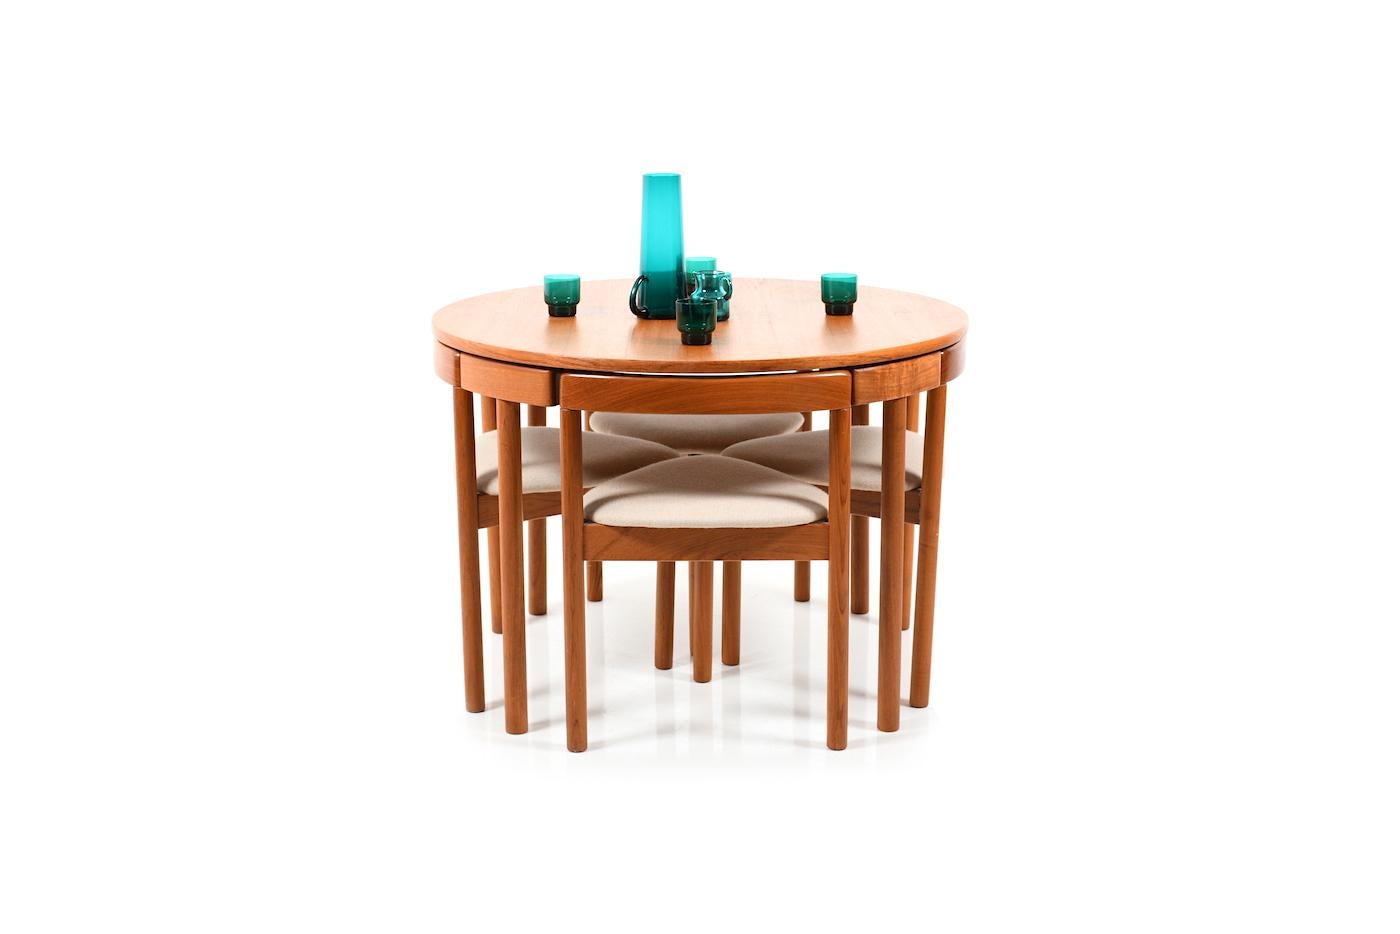 Danish dinner set in teak. Manufactured by A.B.J. Denmark. The dining set consists of a round table with 4 matching chairs. The chairs can be pushed exactly under the tabletop. Produced in the 1980s.
Size: table: 73.5 CM (H), diameter 105.0 cm